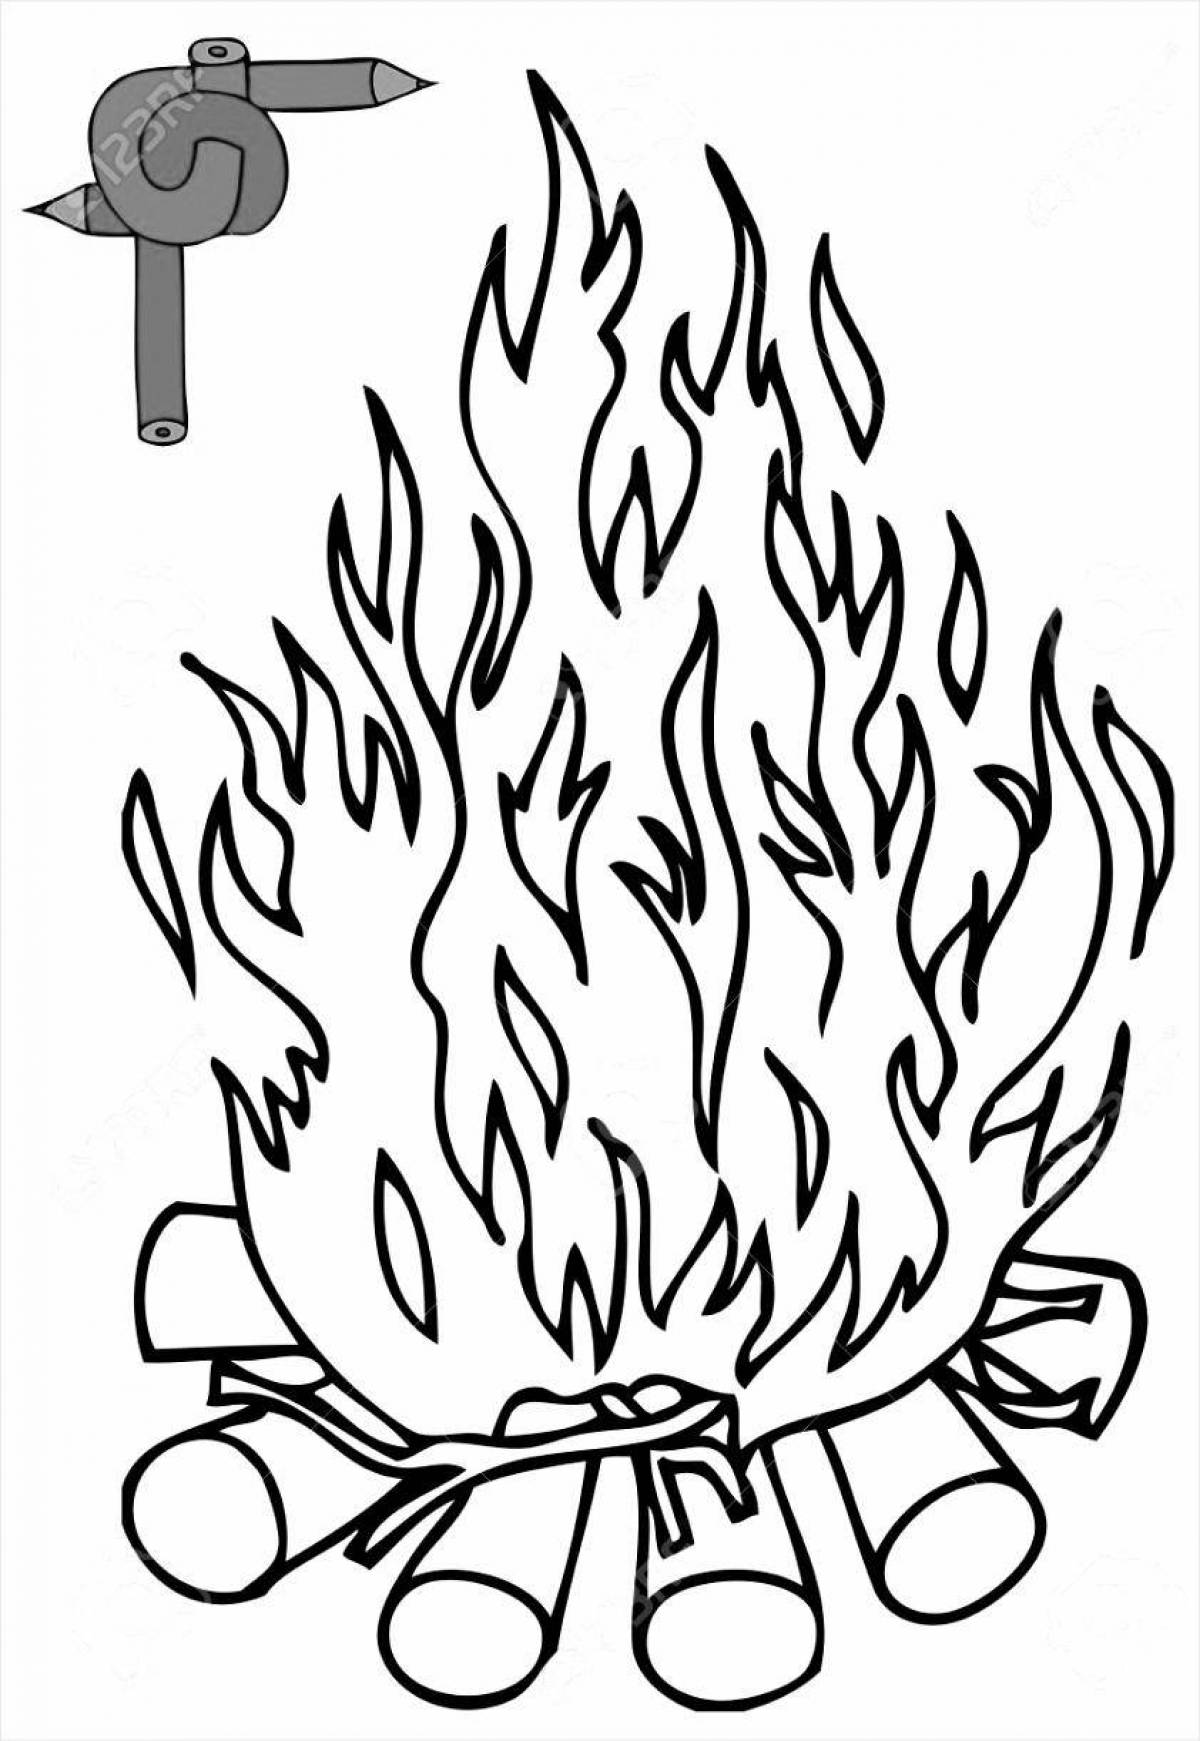 Coloring book twinkling bonfire for babies